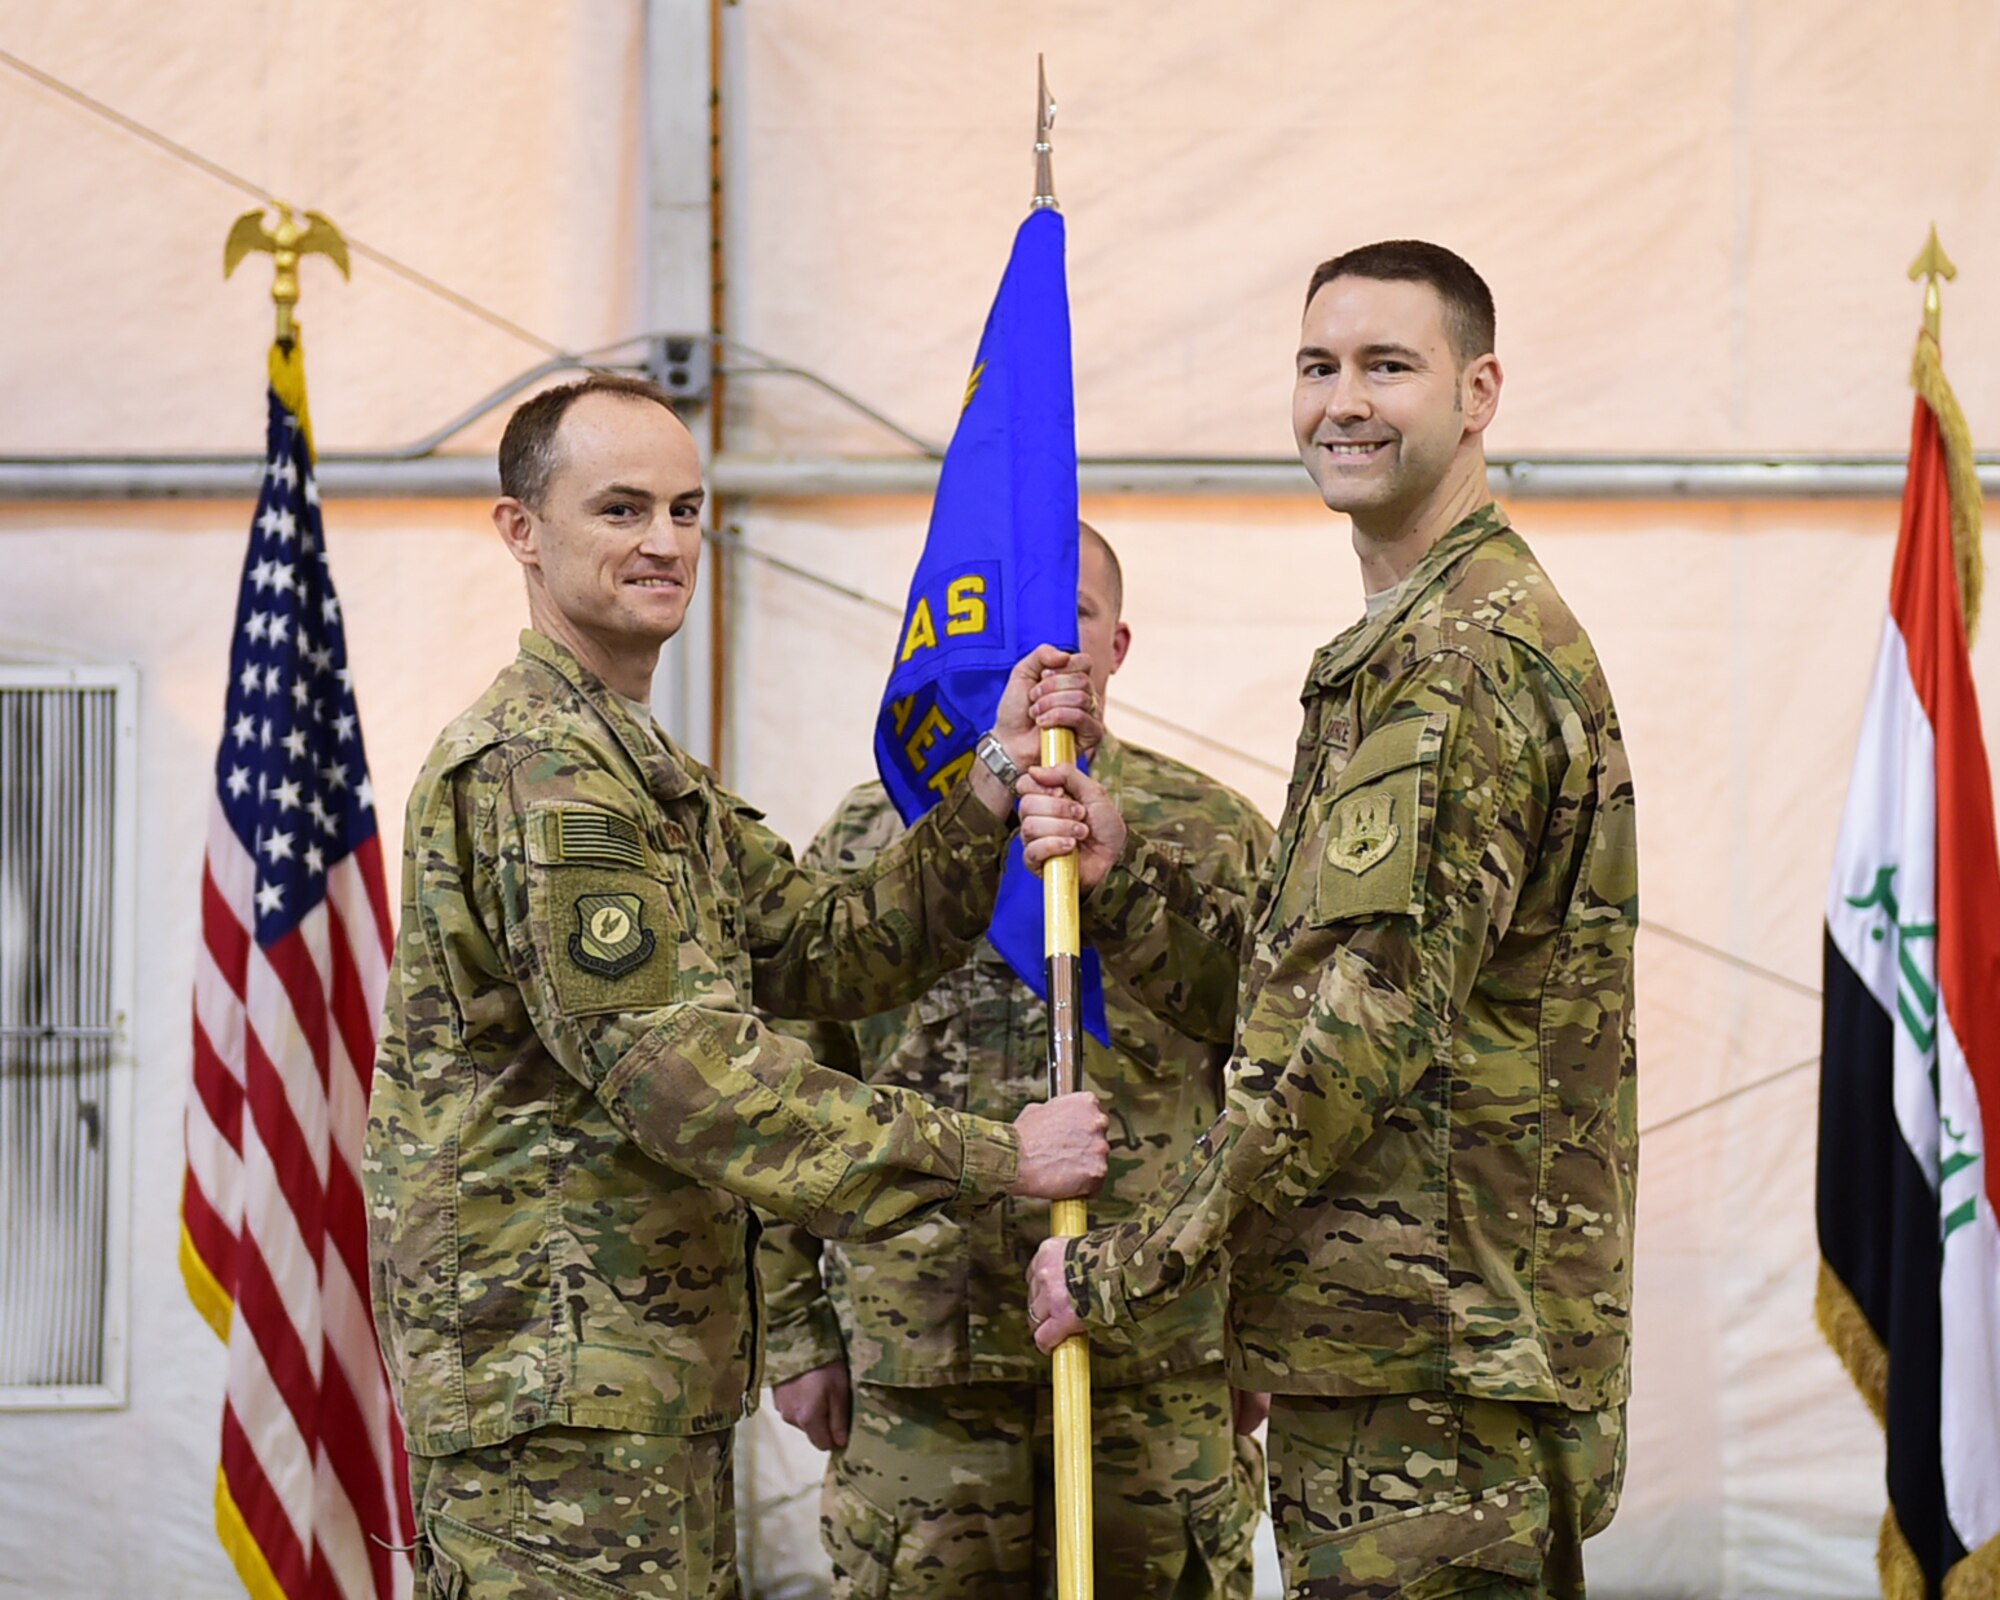 Maj. Ross “Alex” Mol assumes command of the 870th Air Expeditionary Advisory Squadron from Col. Bradley Bridges, 370th Air Expeditionary Advisory Group commander, Jan. 9, 2016 in Baghdad, Iraq. The 870 AEAS provides direct support to the Iraqi Air Force through logistics advise and assist missions, and commands all aerial ports in Iraq.   (U.S. Air Force photo by Staff Sgt. Jerilyn Quintanilla)